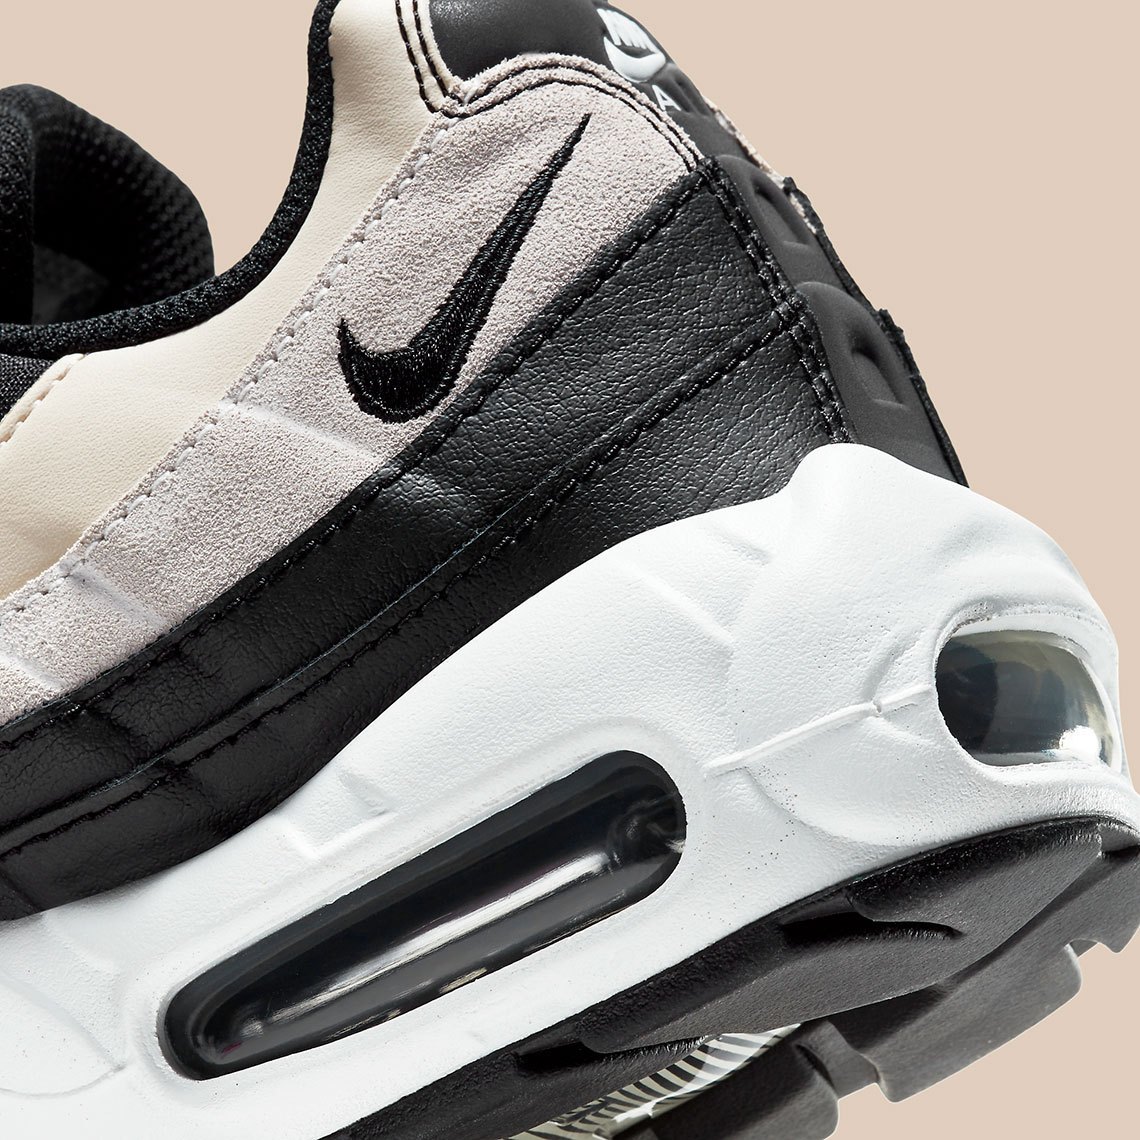 Nike To Release Air Max 95 In ‘Black Champagne’ Colorway